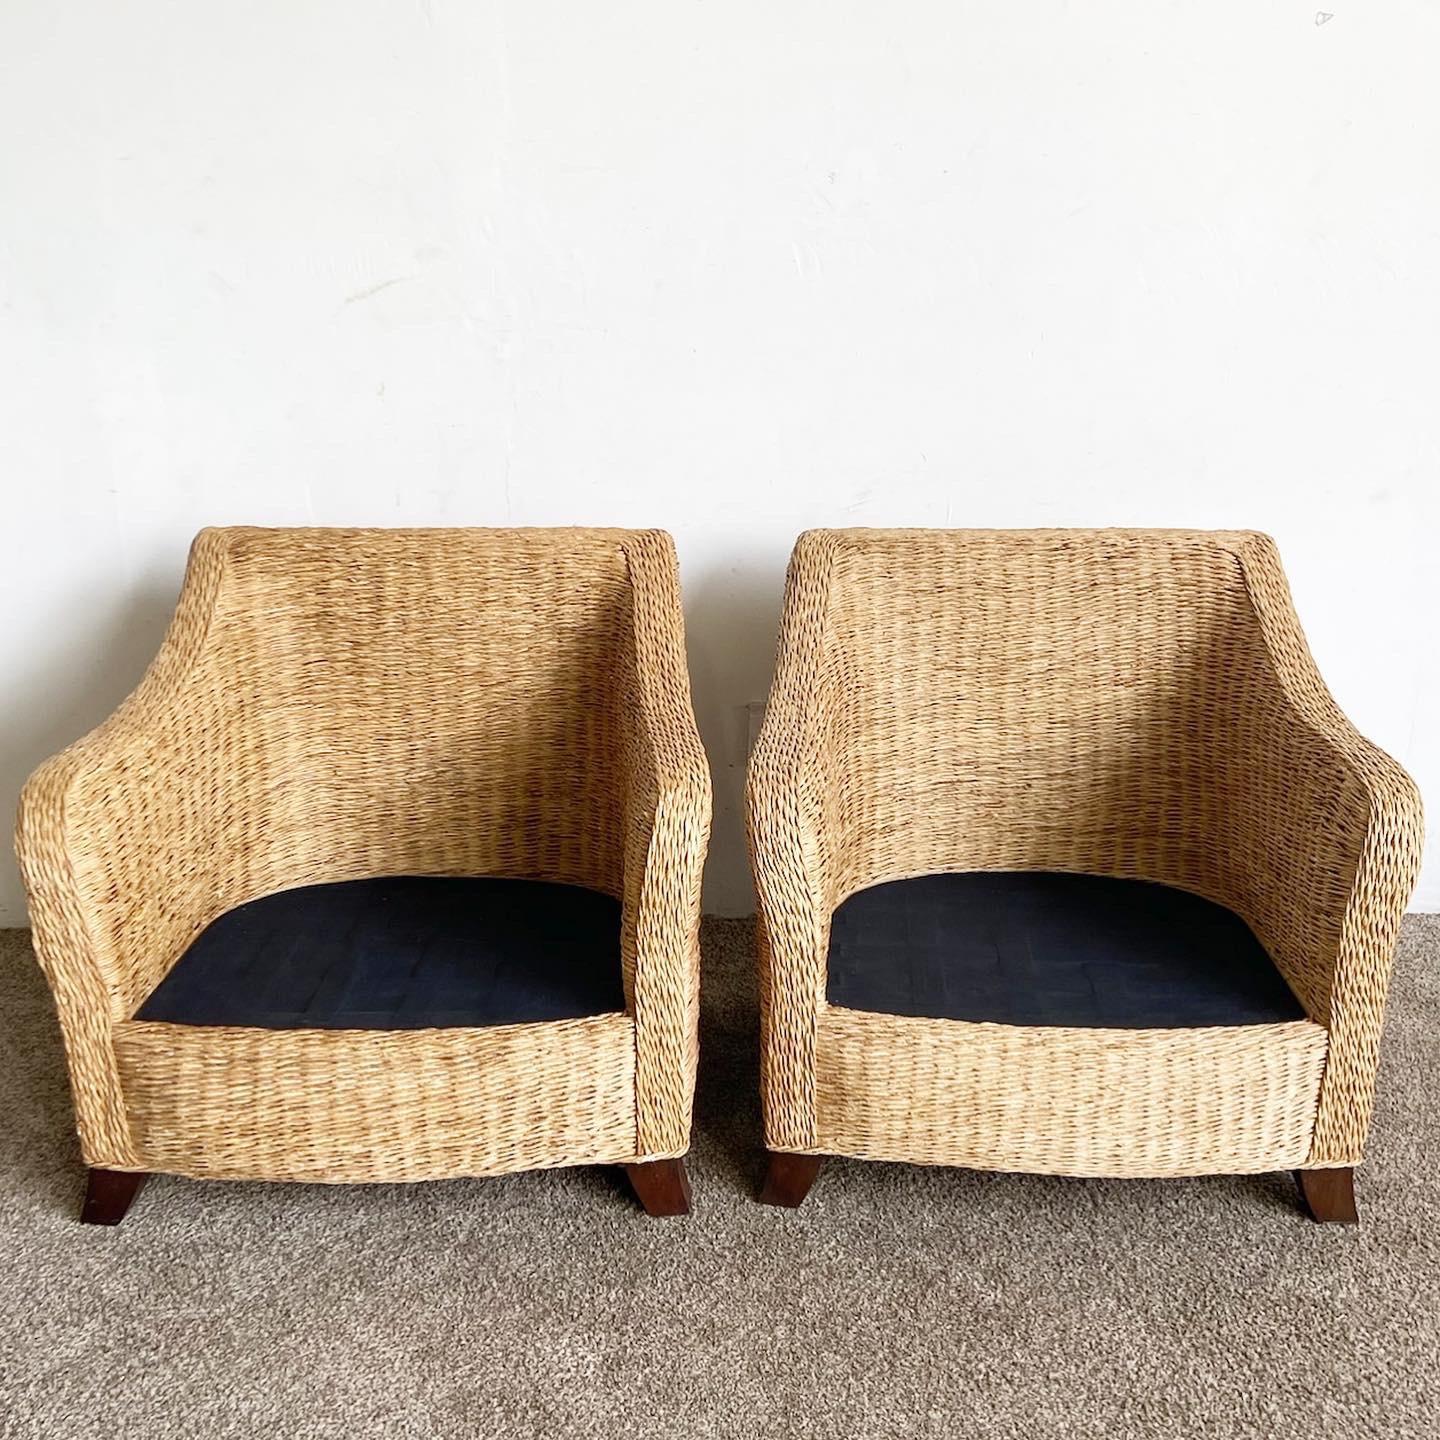 Late 20th Century Boho Chic Wicker Arm Chairs With Brown Cushions For Sale